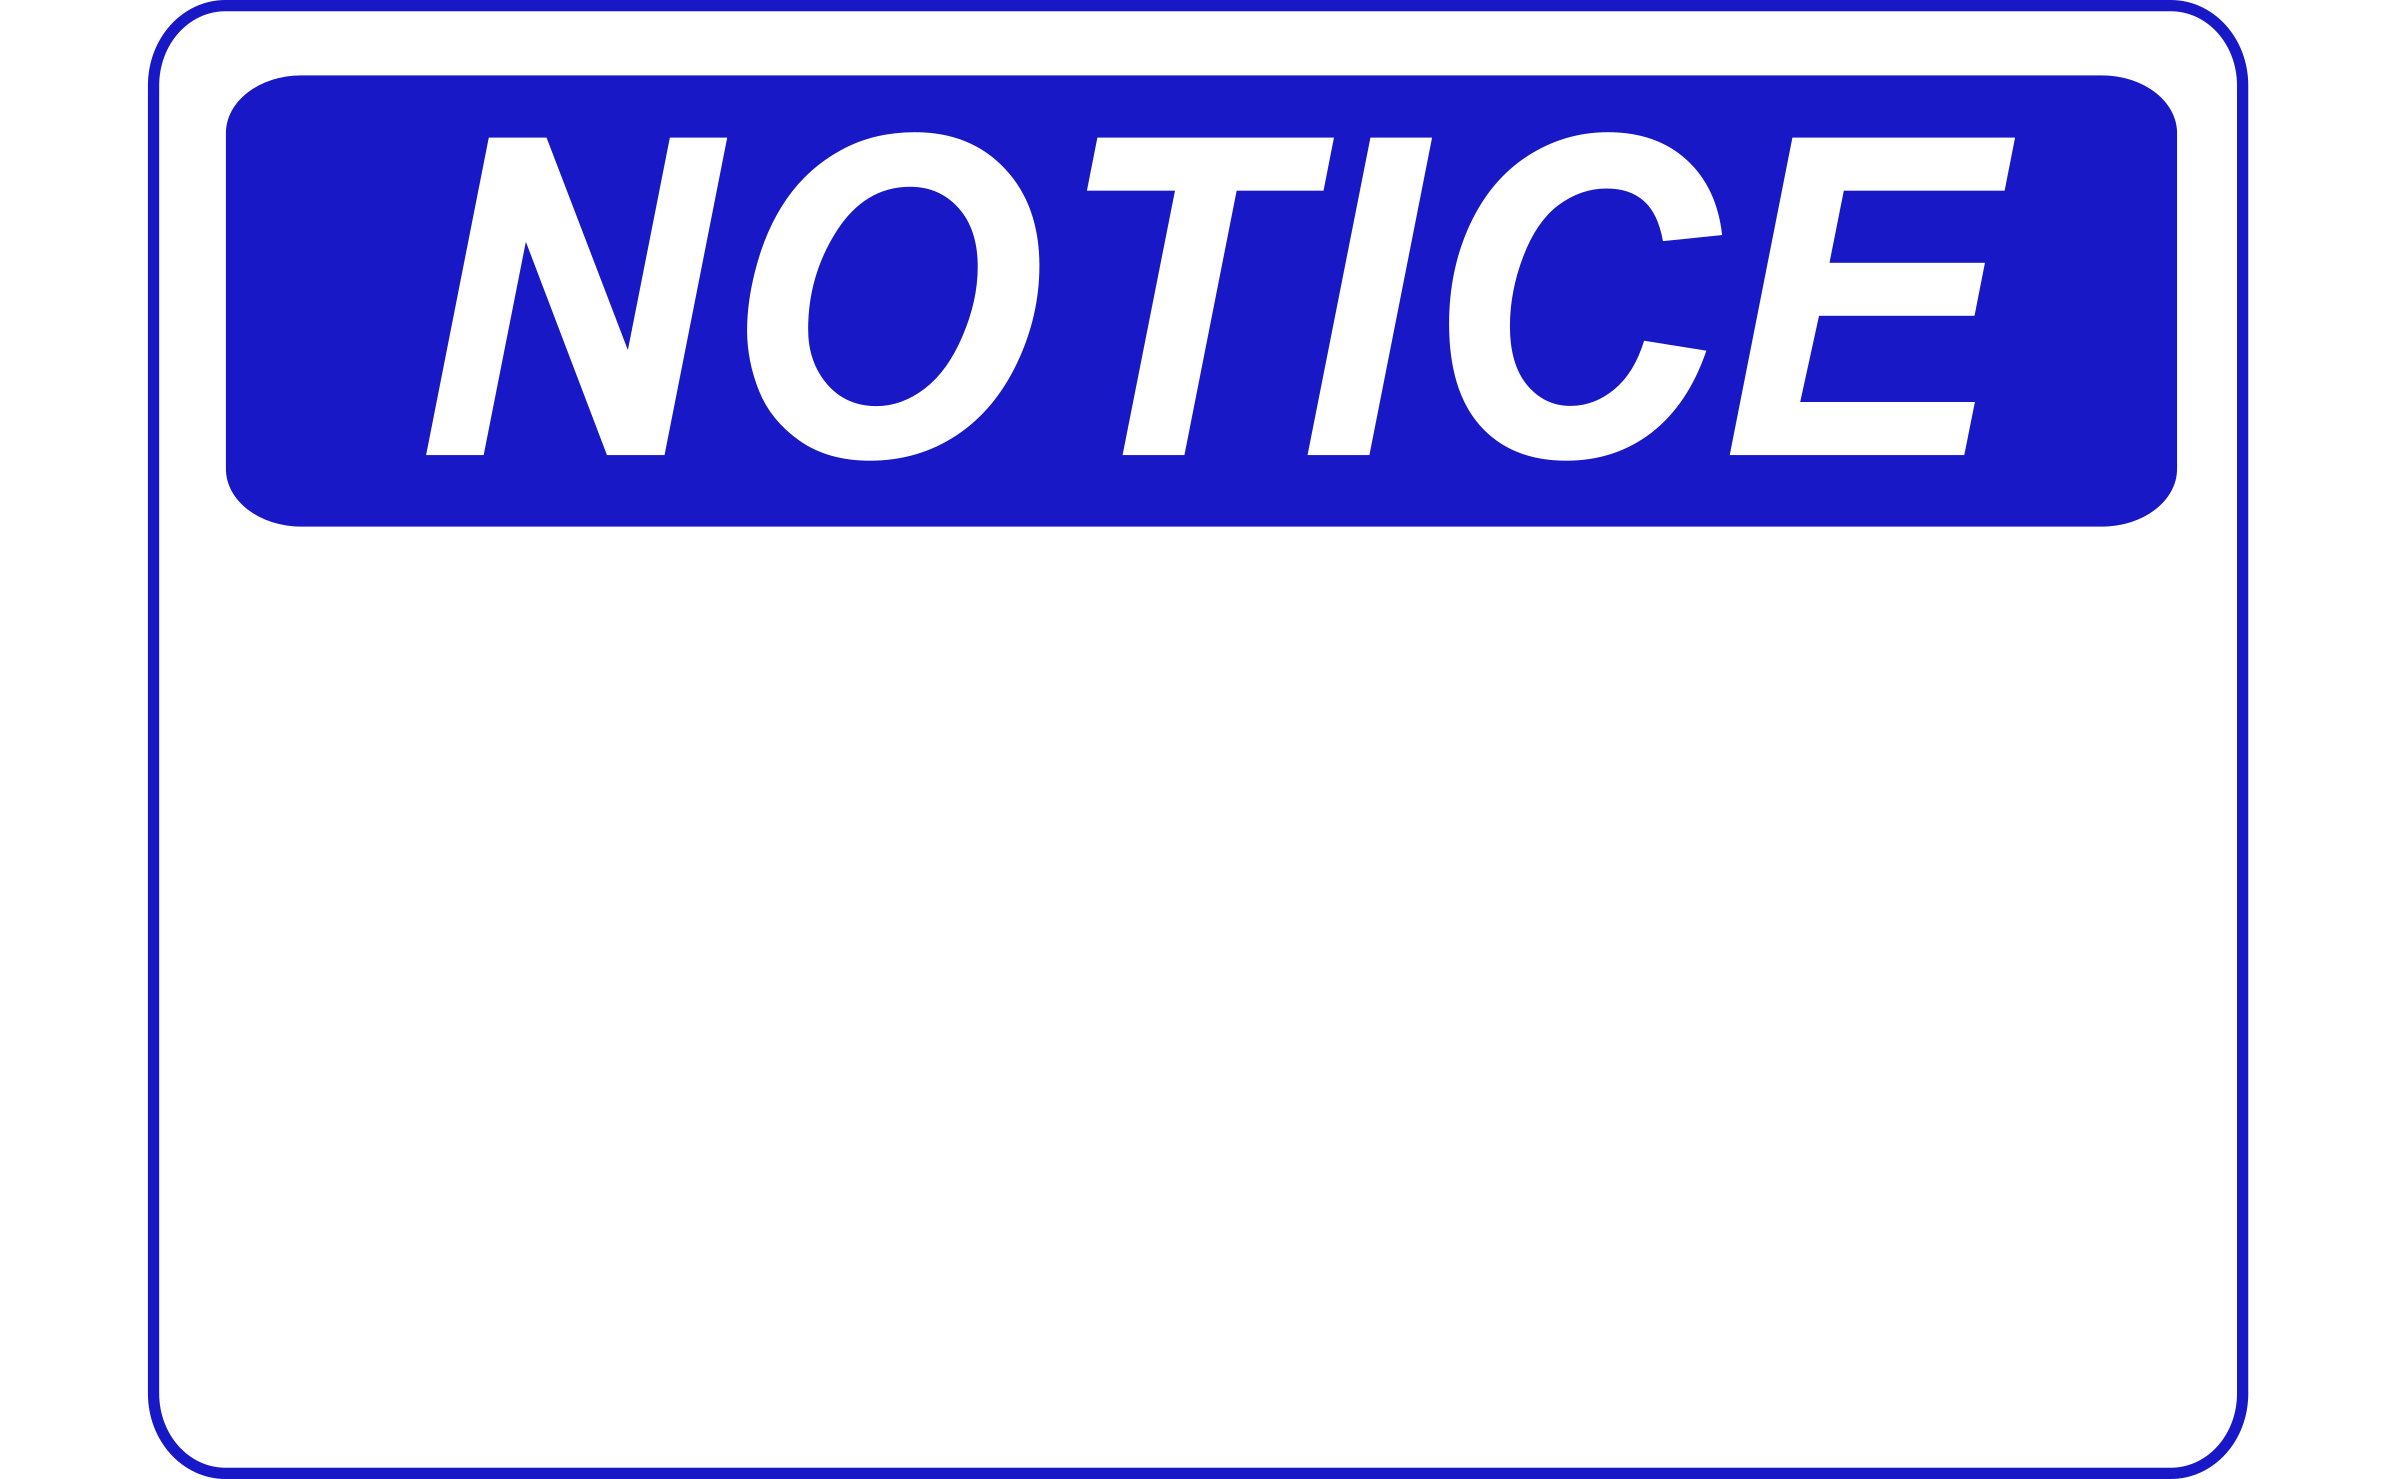 Notice Template from clipart-library.com